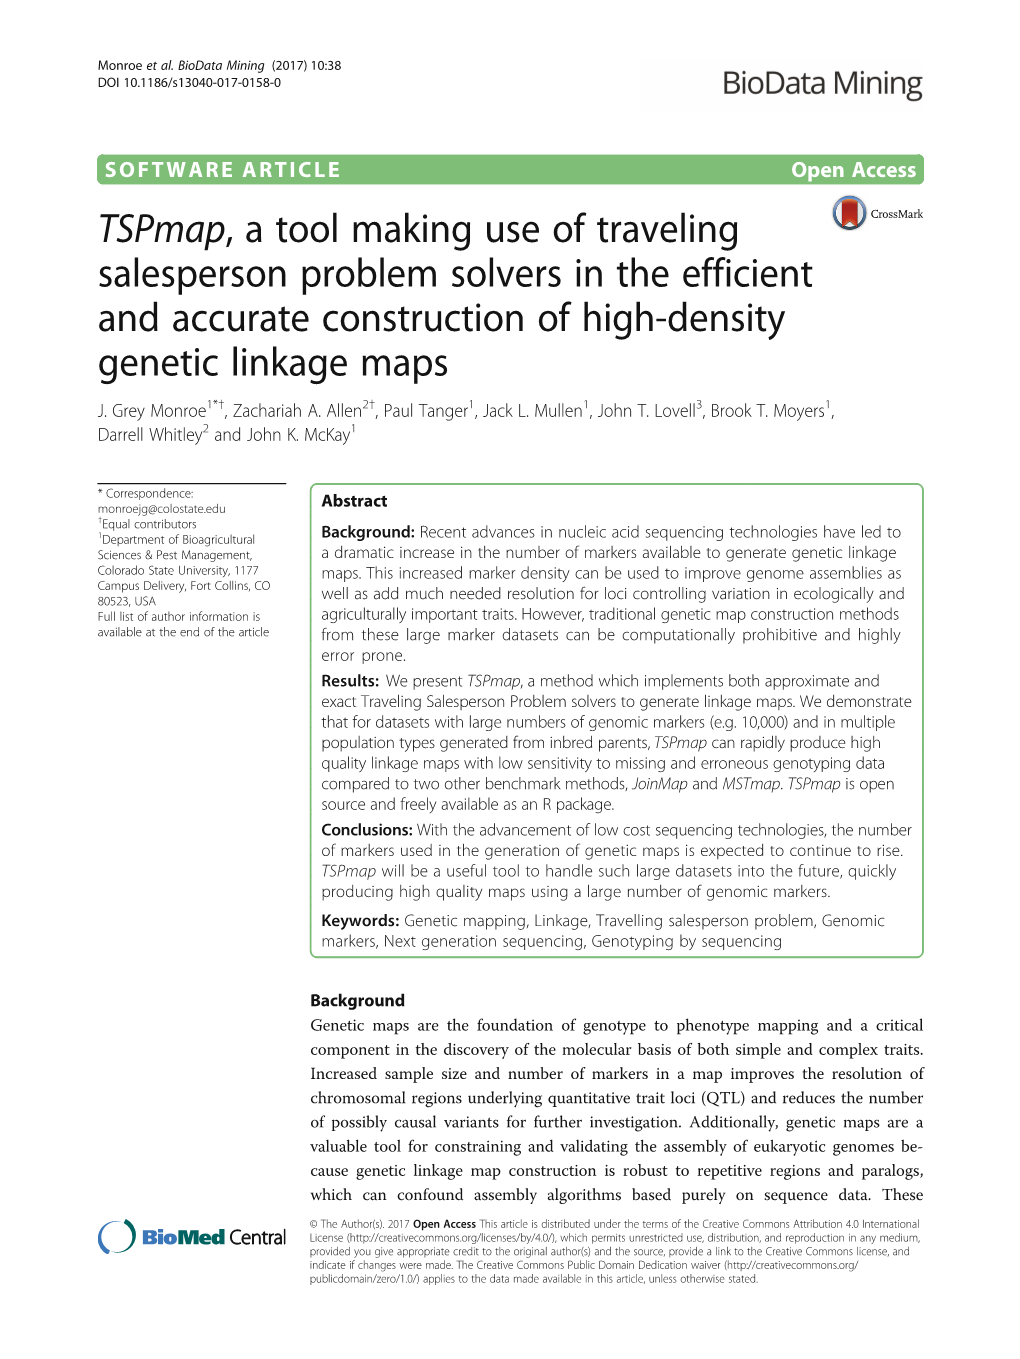 Tspmap, a Tool Making Use of Traveling Salesperson Problem Solvers in the Efficient and Accurate Construction of High-Density Genetic Linkage Maps J